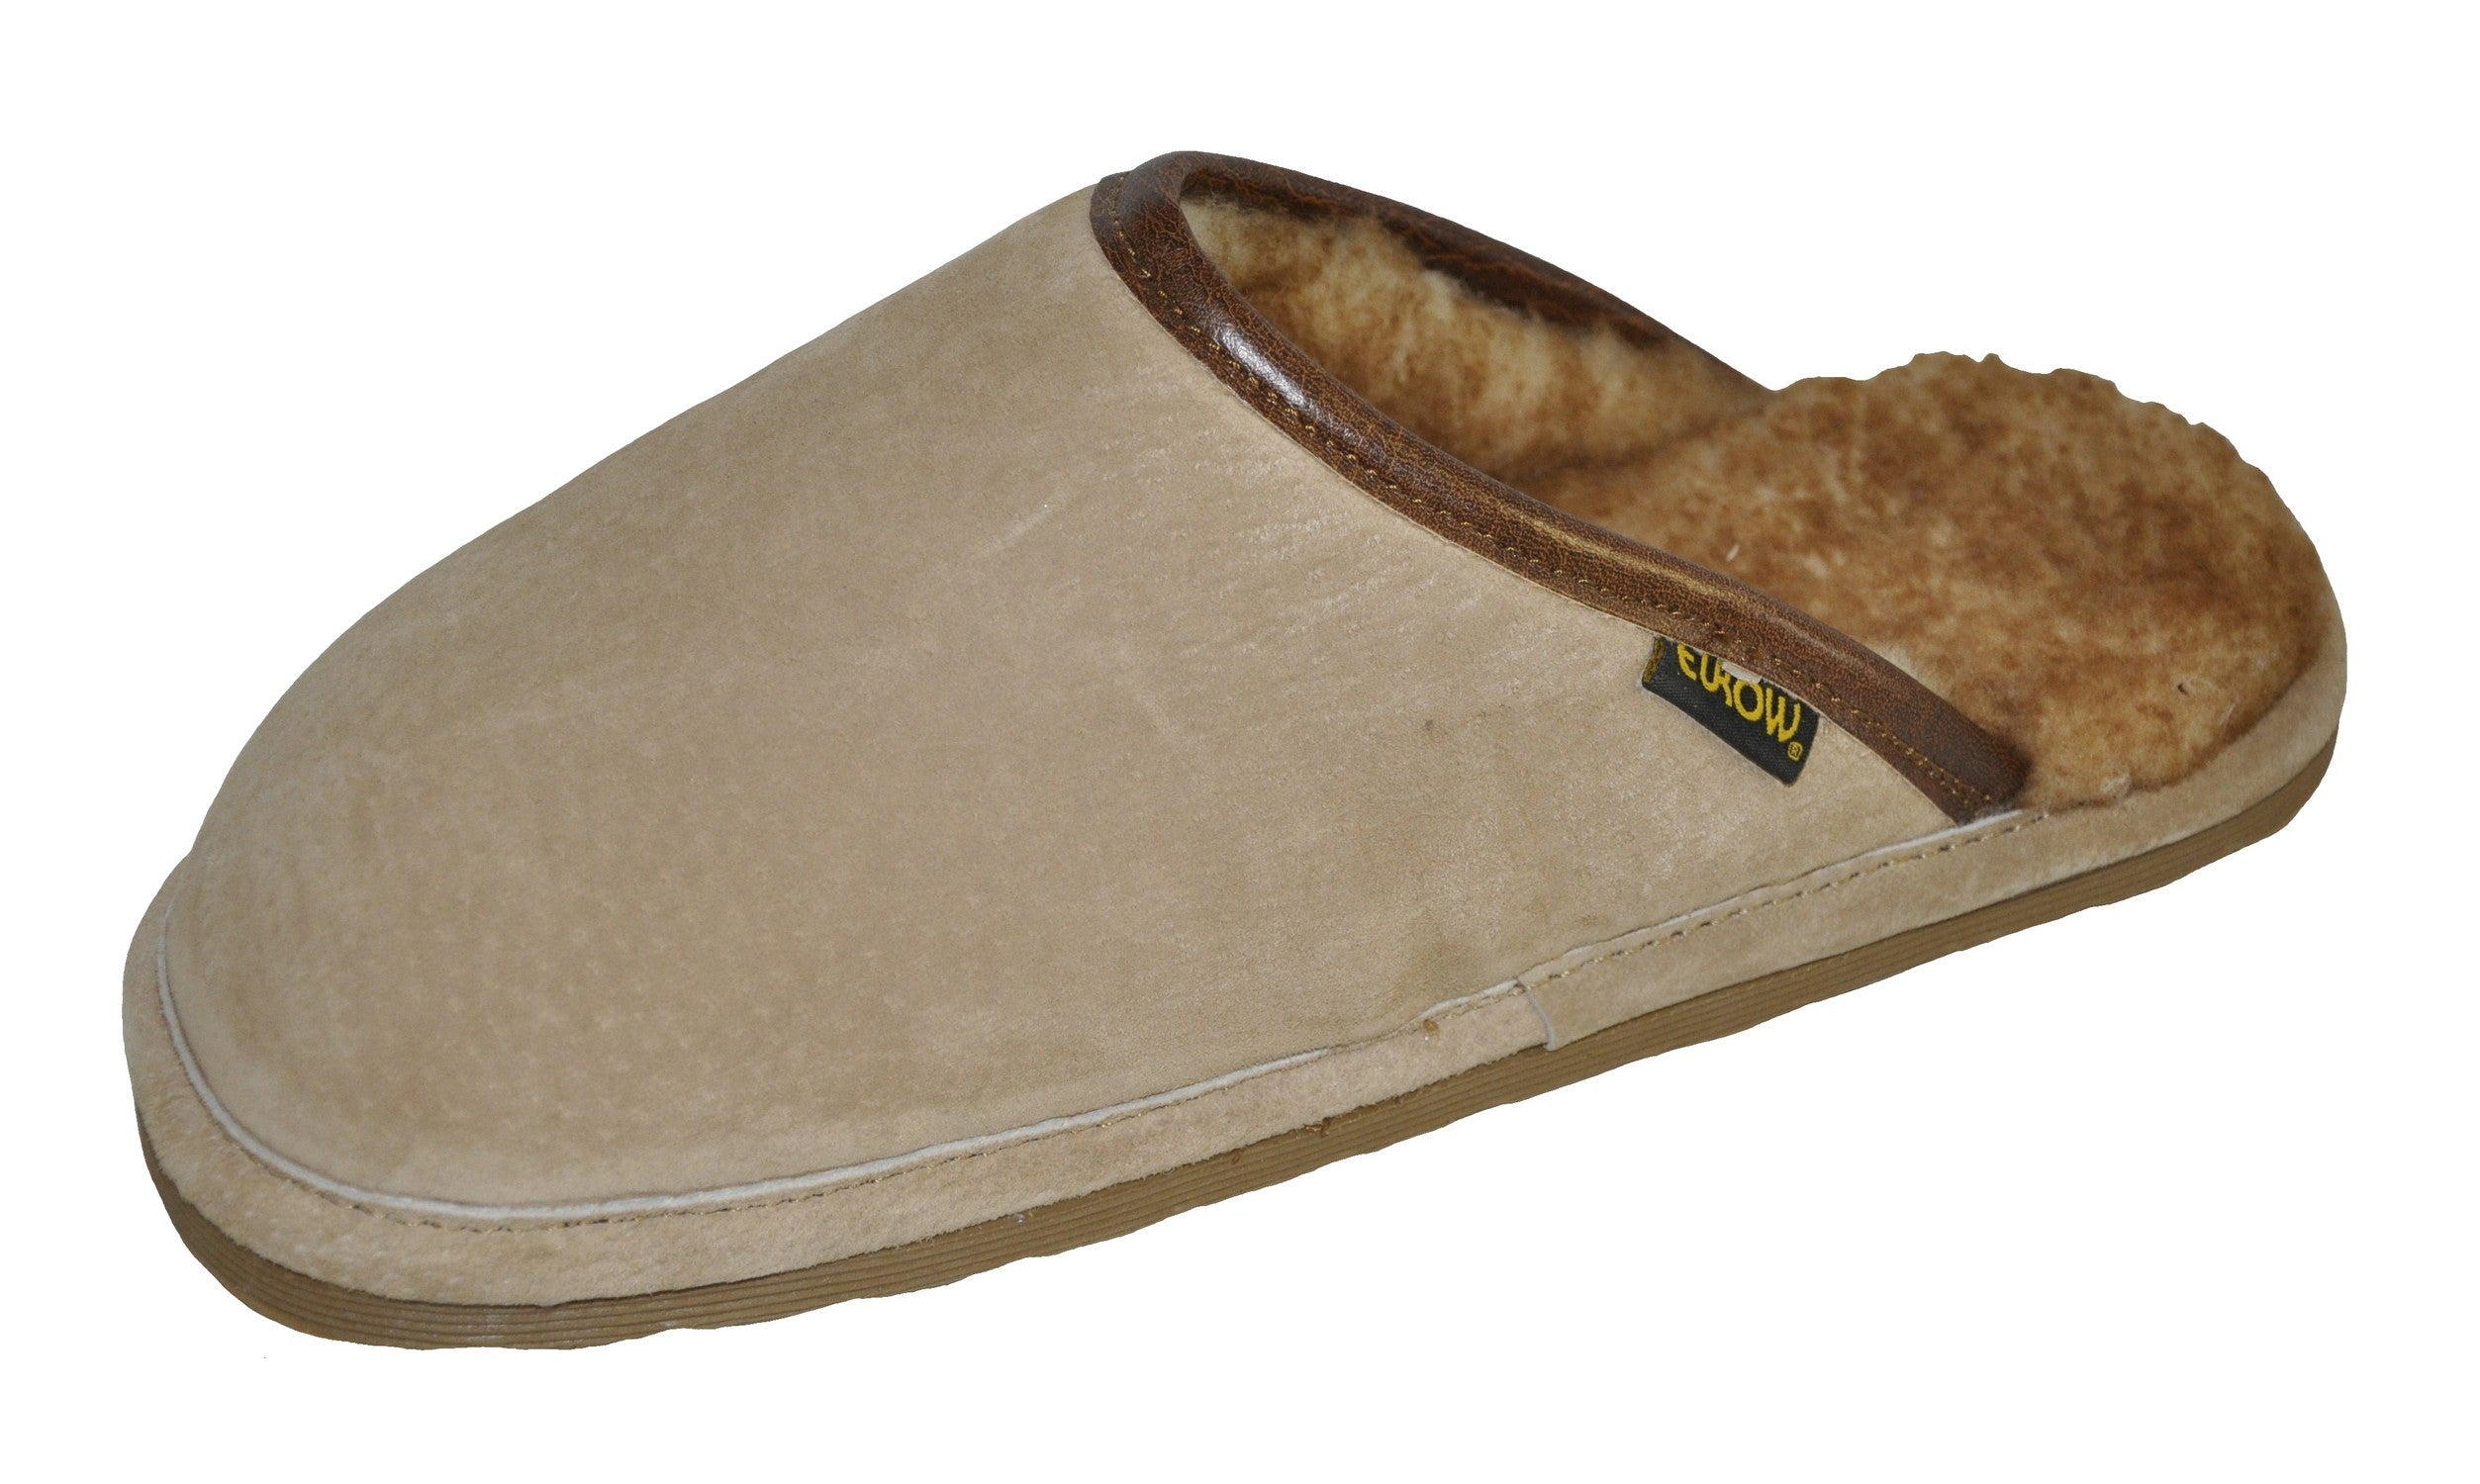 mens suede slippers with hard soles